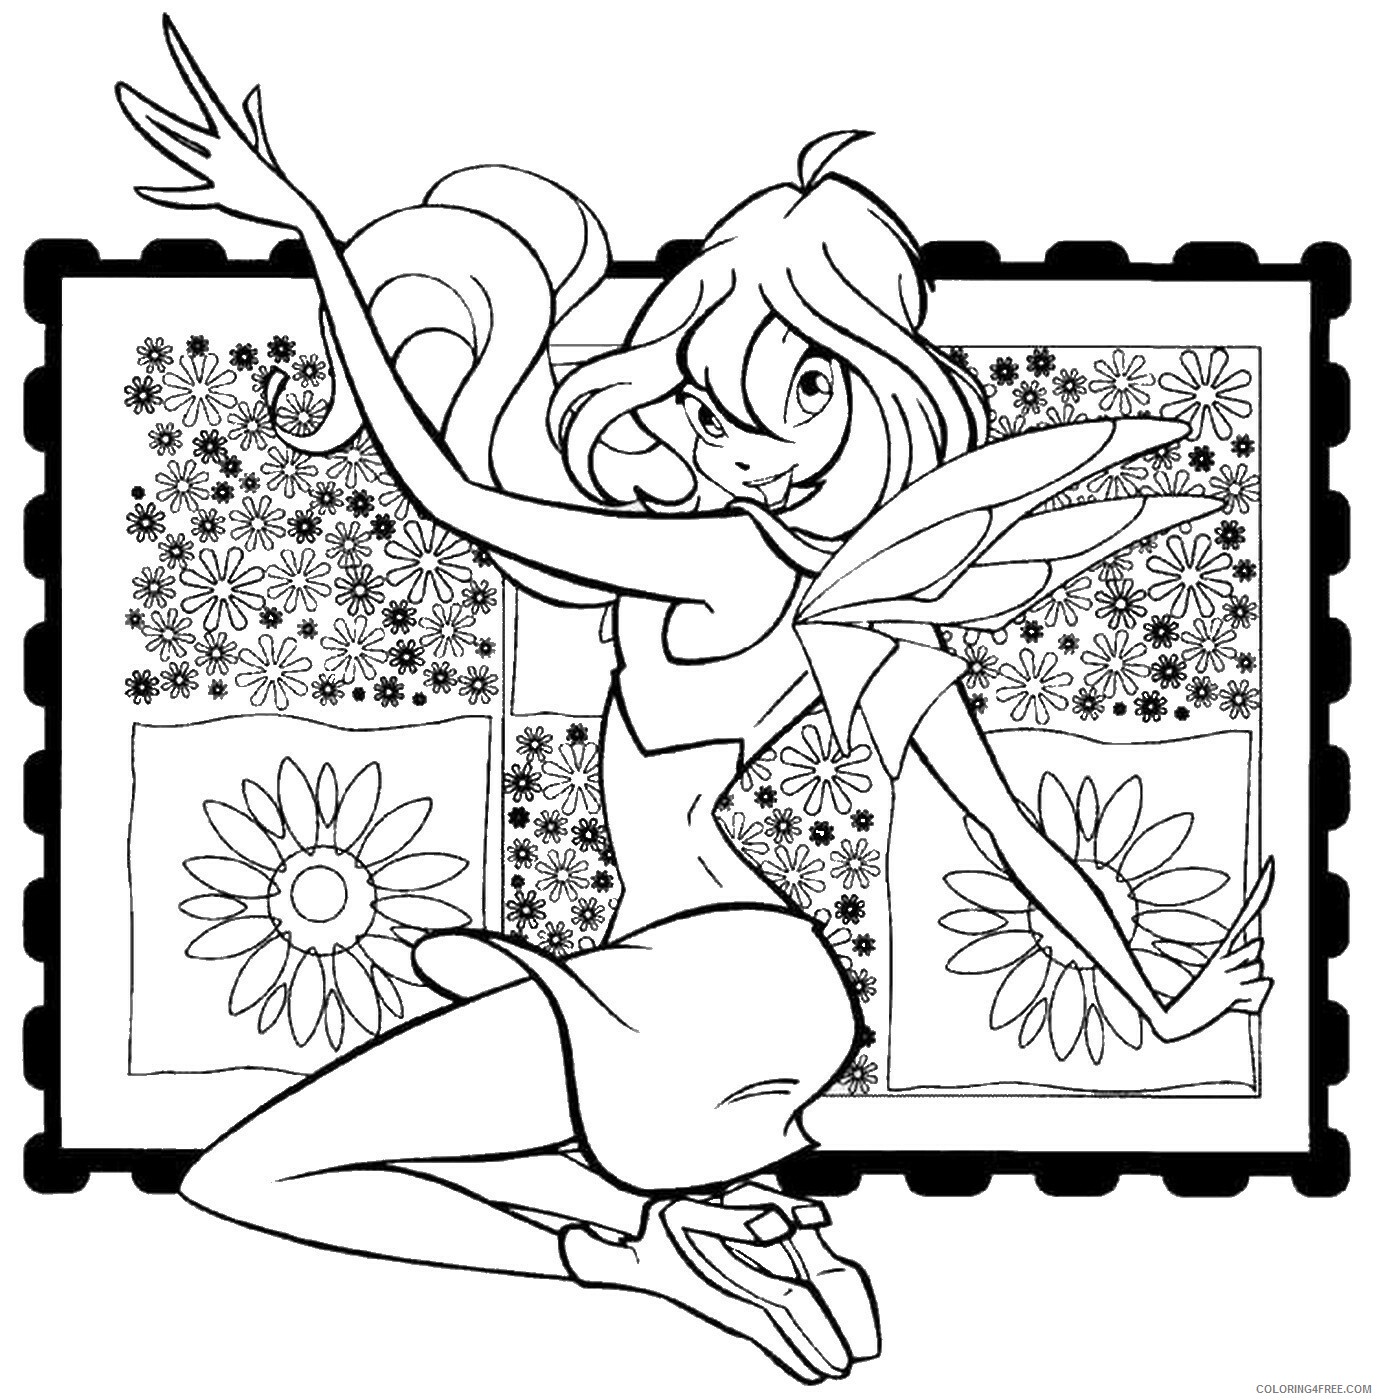 Winx Coloring Pages TV Film winx_cl_30 Printable 2020 11389 Coloring4free